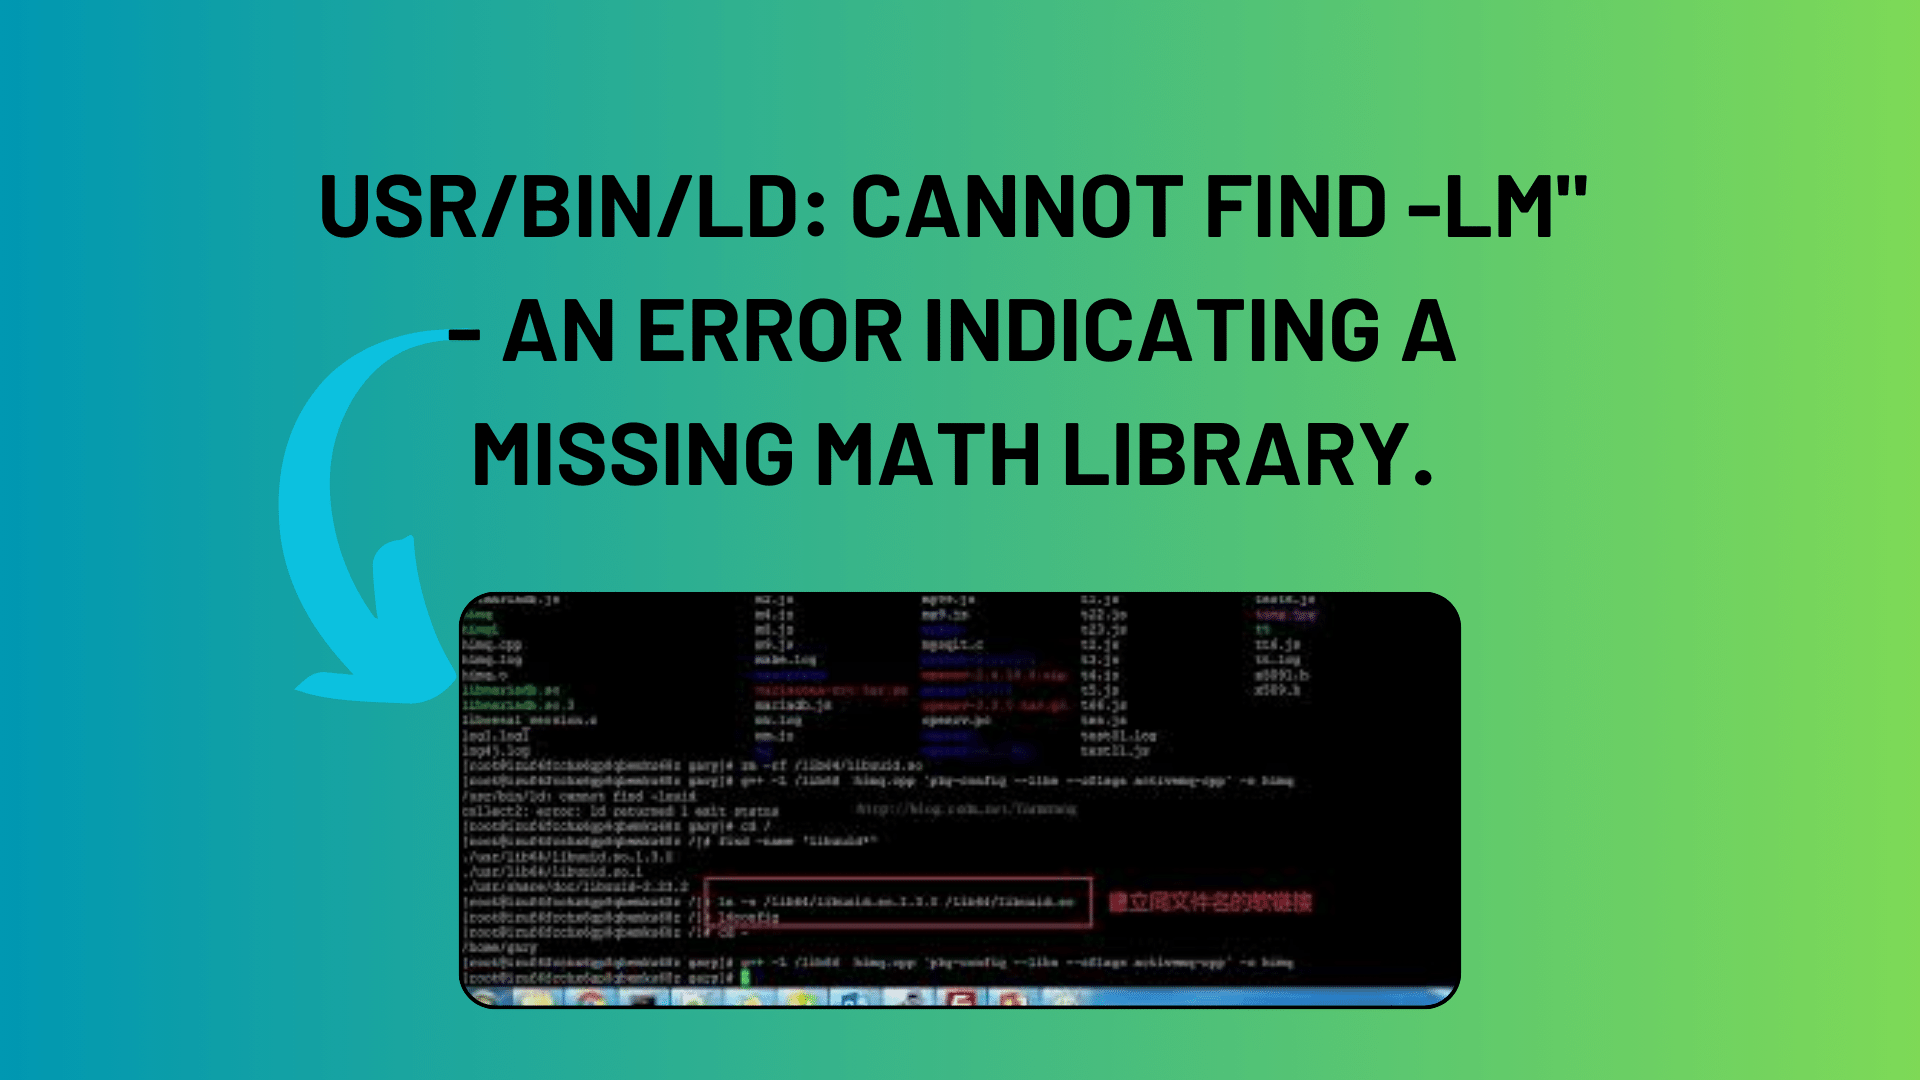 usrbinld cannot find -lm - An error indicating a missing math library